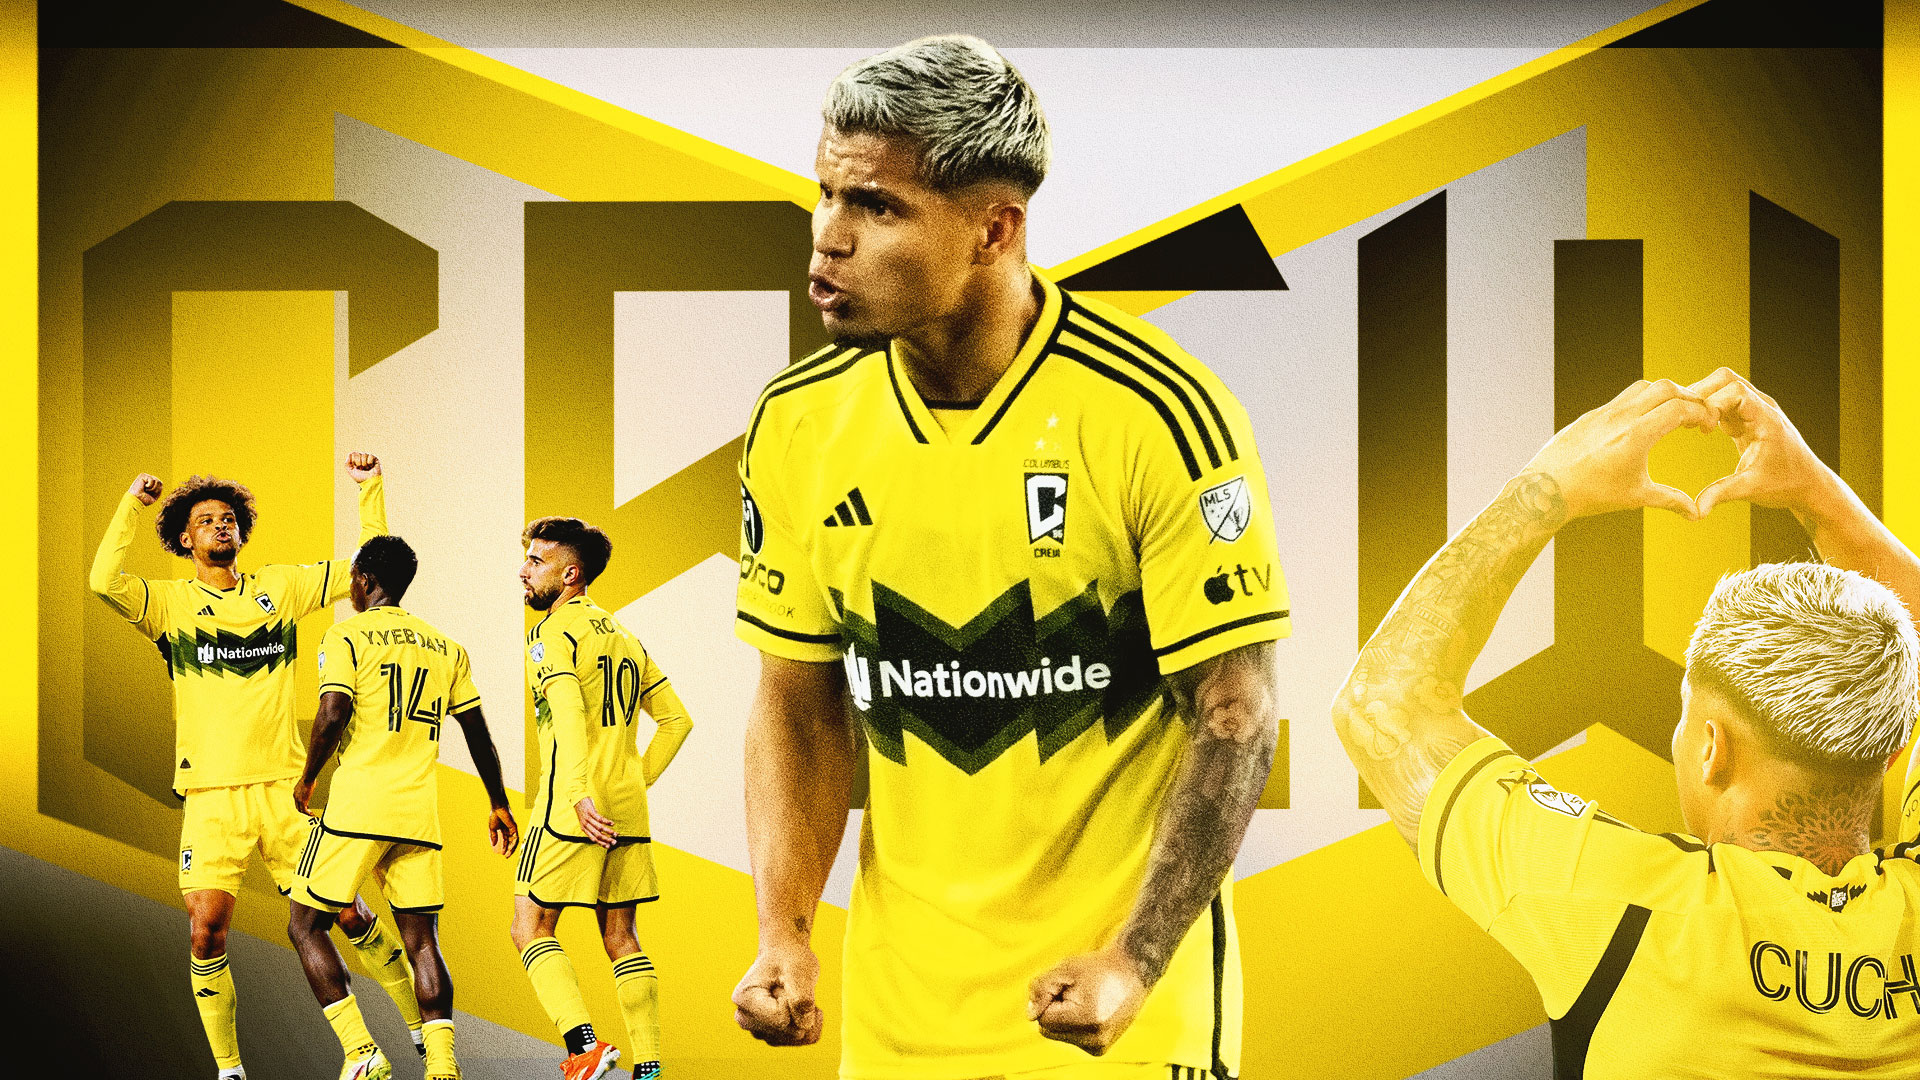 Columbus Crew shows resilience in 'battle for power' with Monterrey